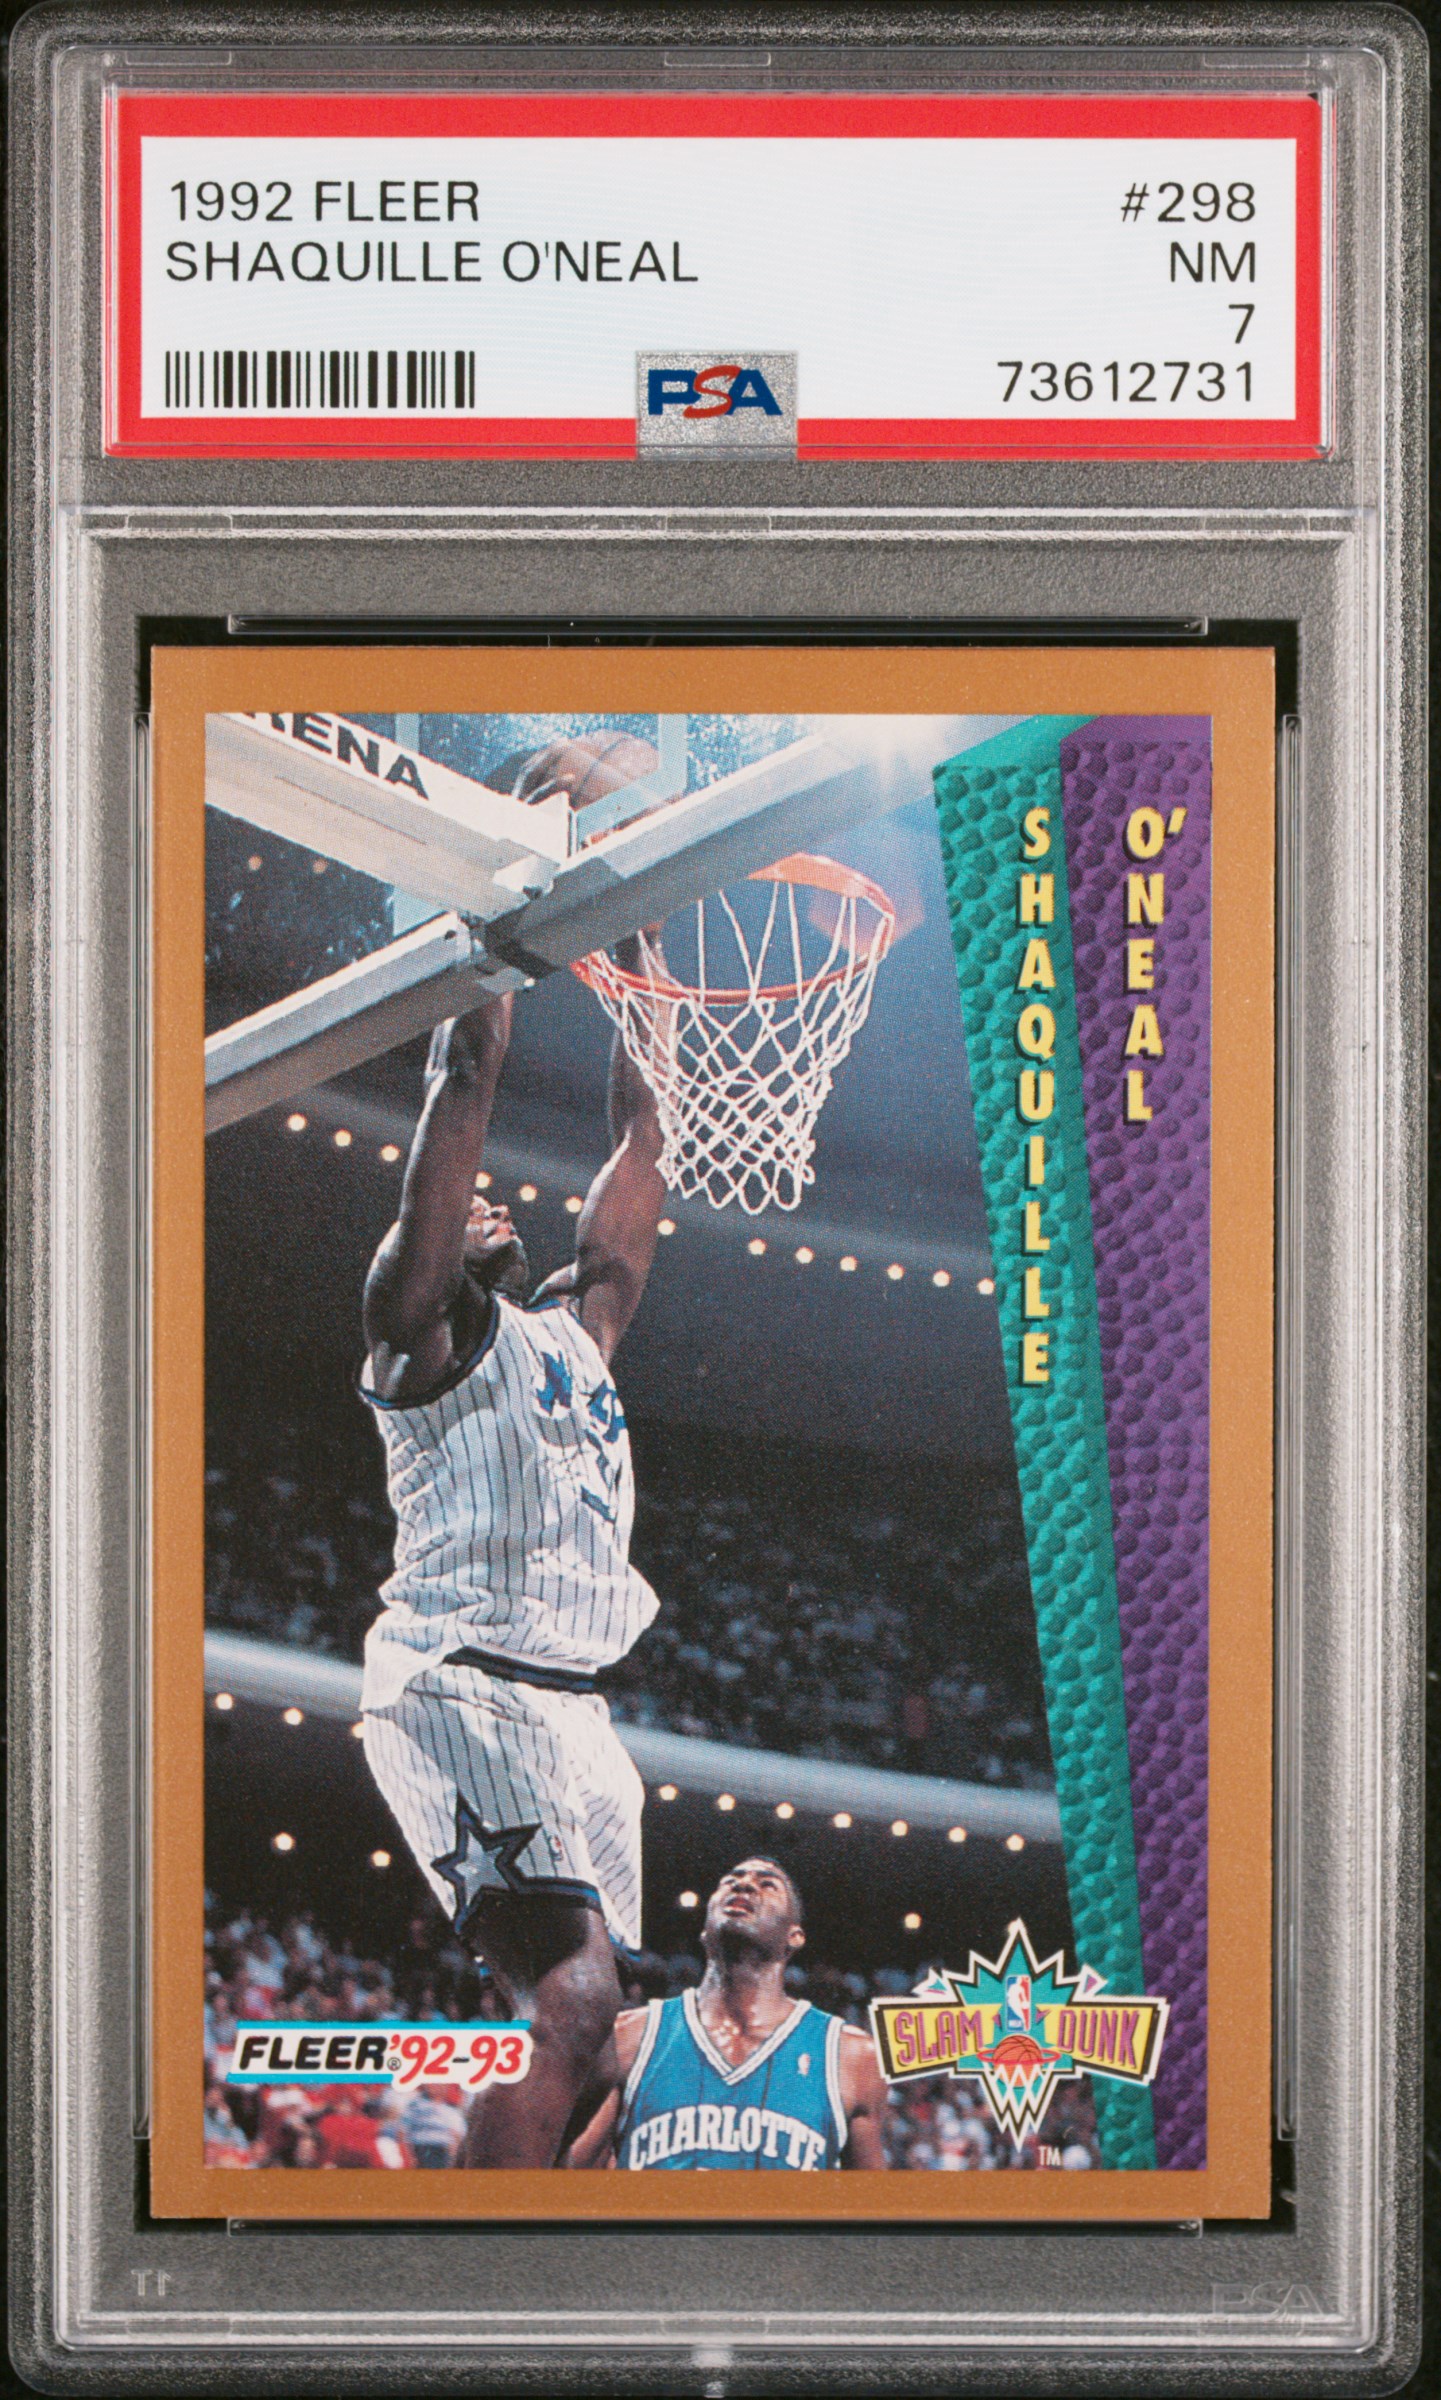 1992-93 Fleer #298 Shaquille O'Neal Rookie Card – PSA NM 7